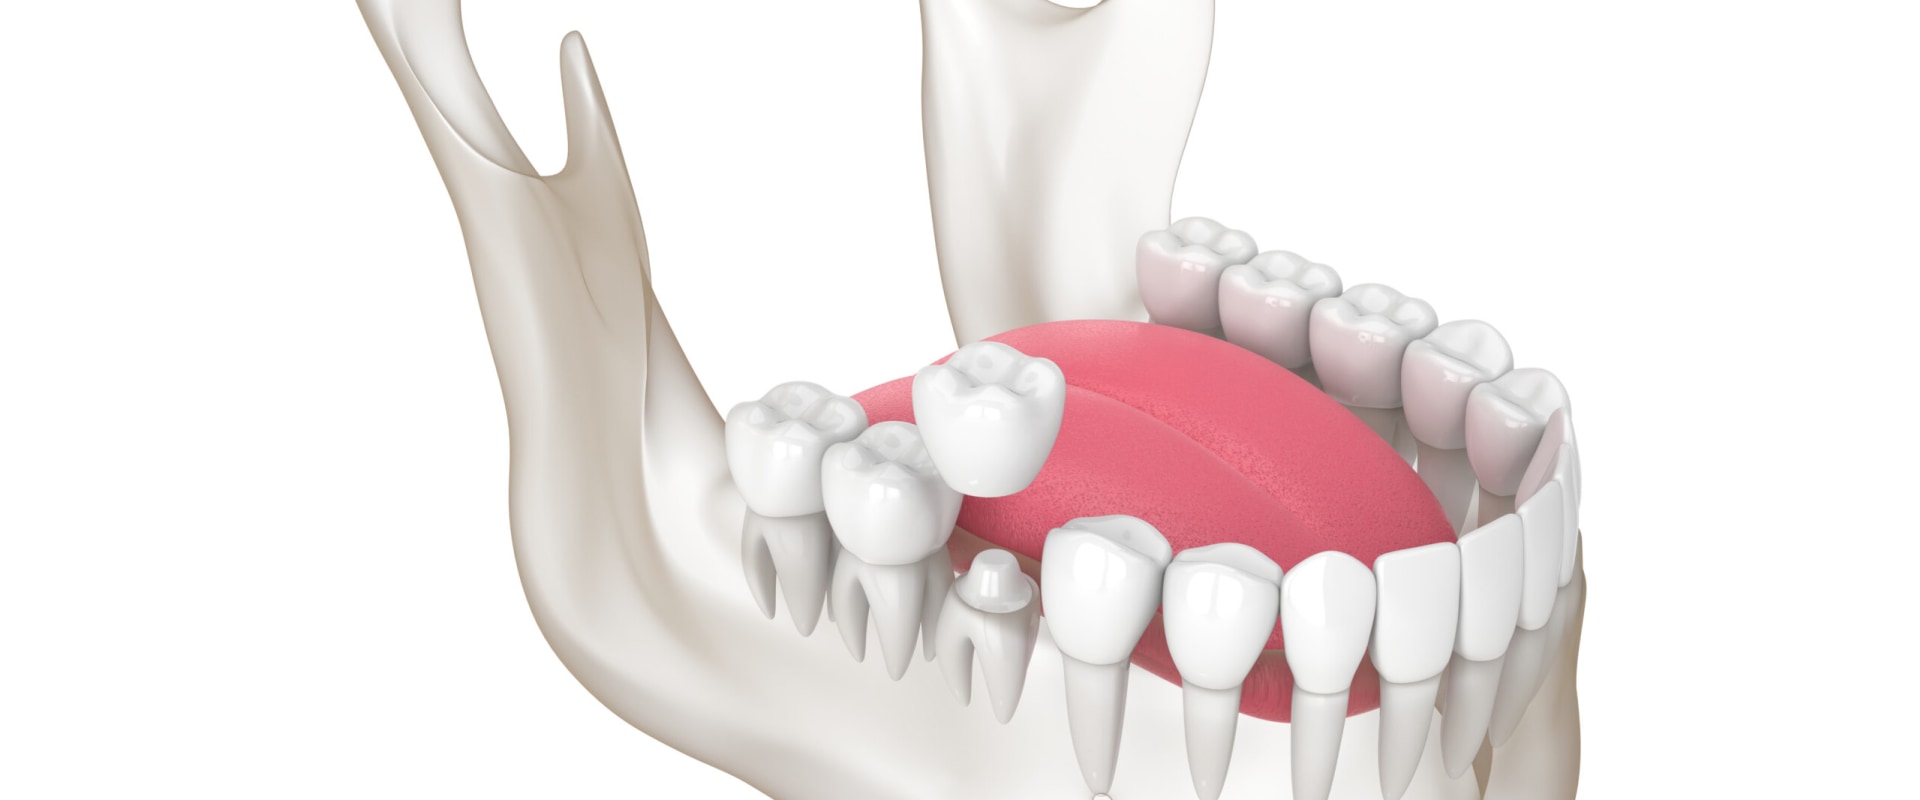 Maintaining Proper Function of the Teeth and Jaw